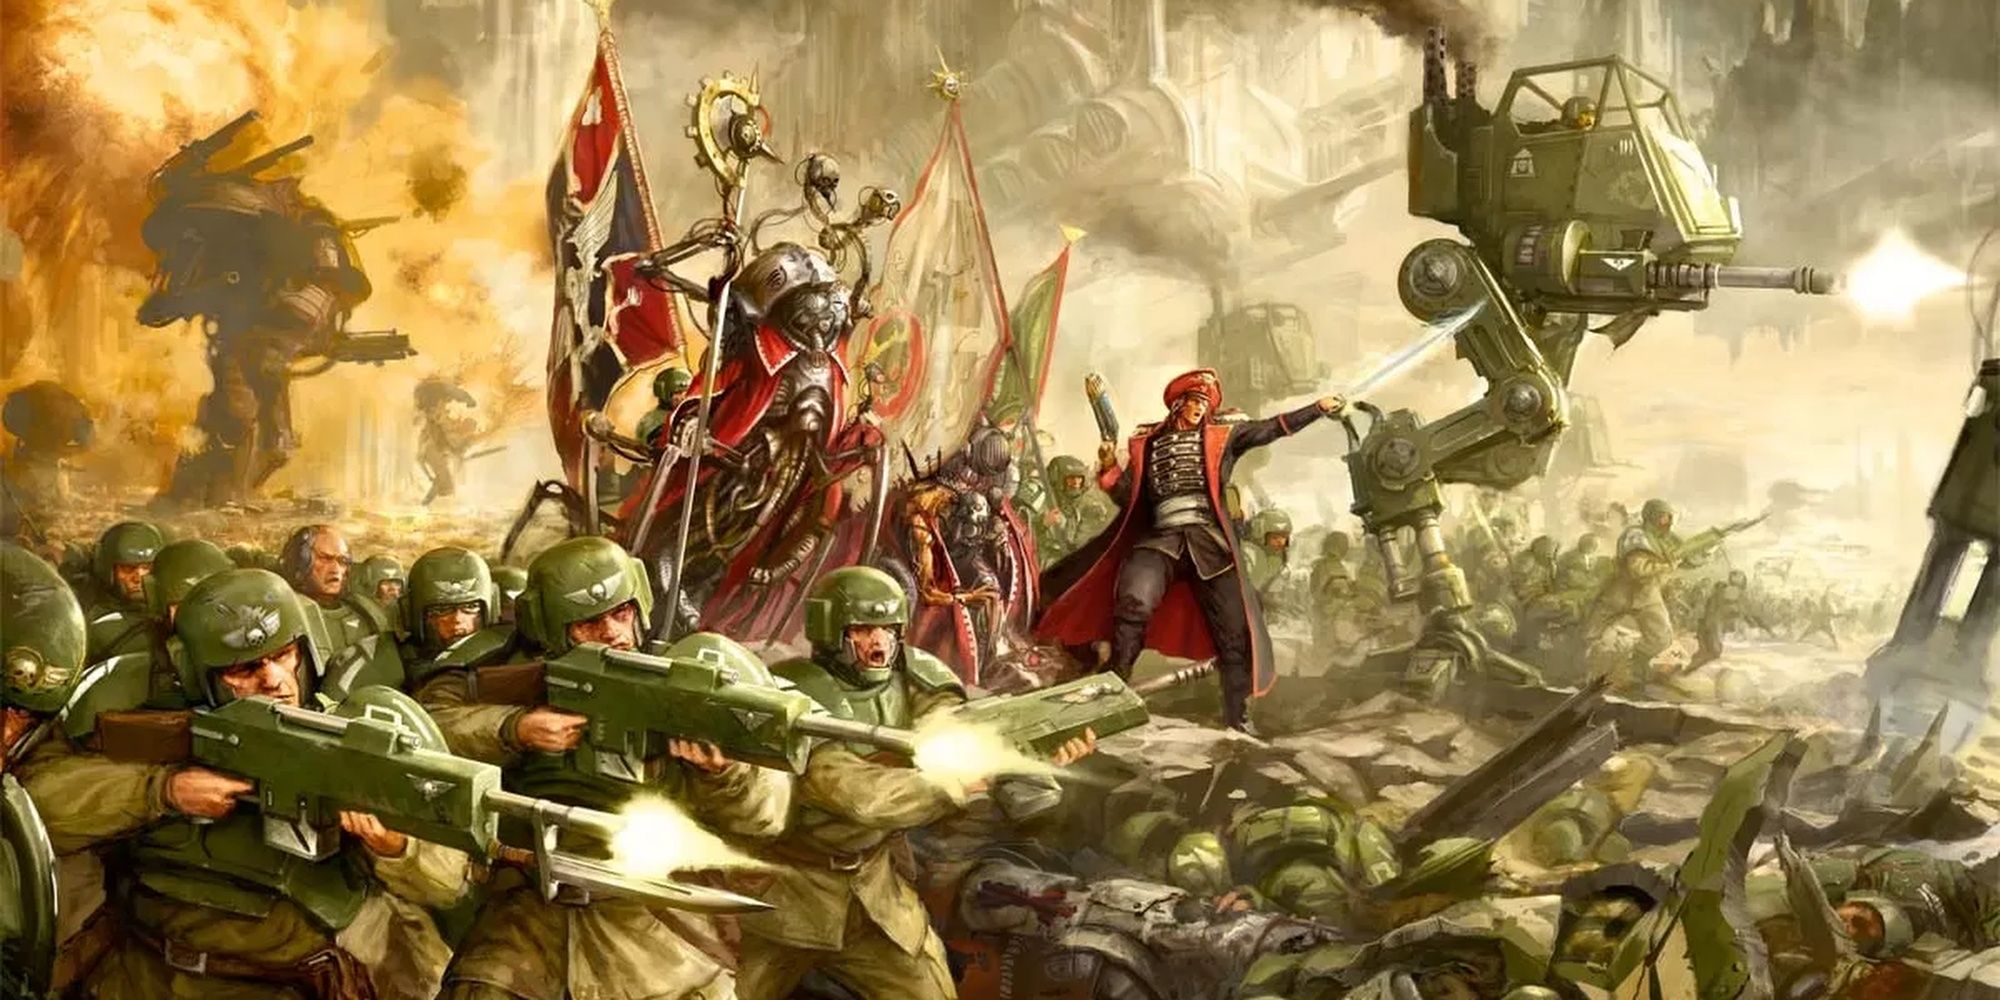 Warhammer 40,000: Cadian shock troops and belisarius cawl going to battle